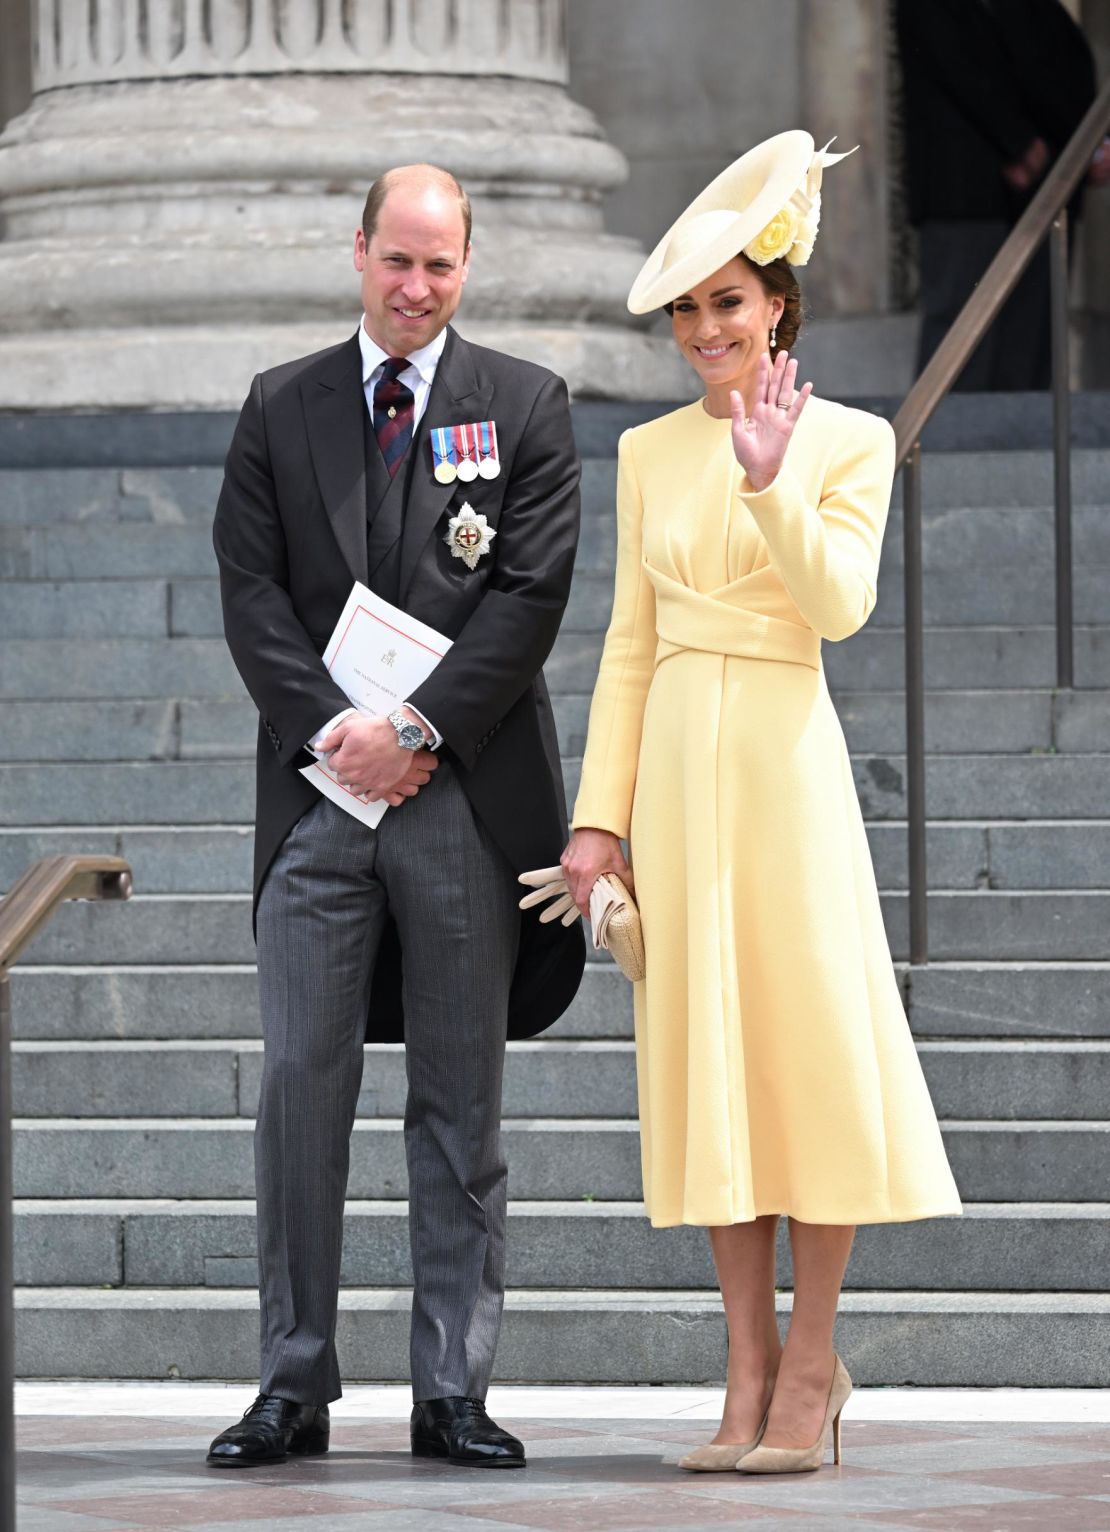 Catherine, Duchess of Cambridge wore a buttery yellow ensemble, with a tea-length dress paired with a twisted waist detail and pearl drop earrings.